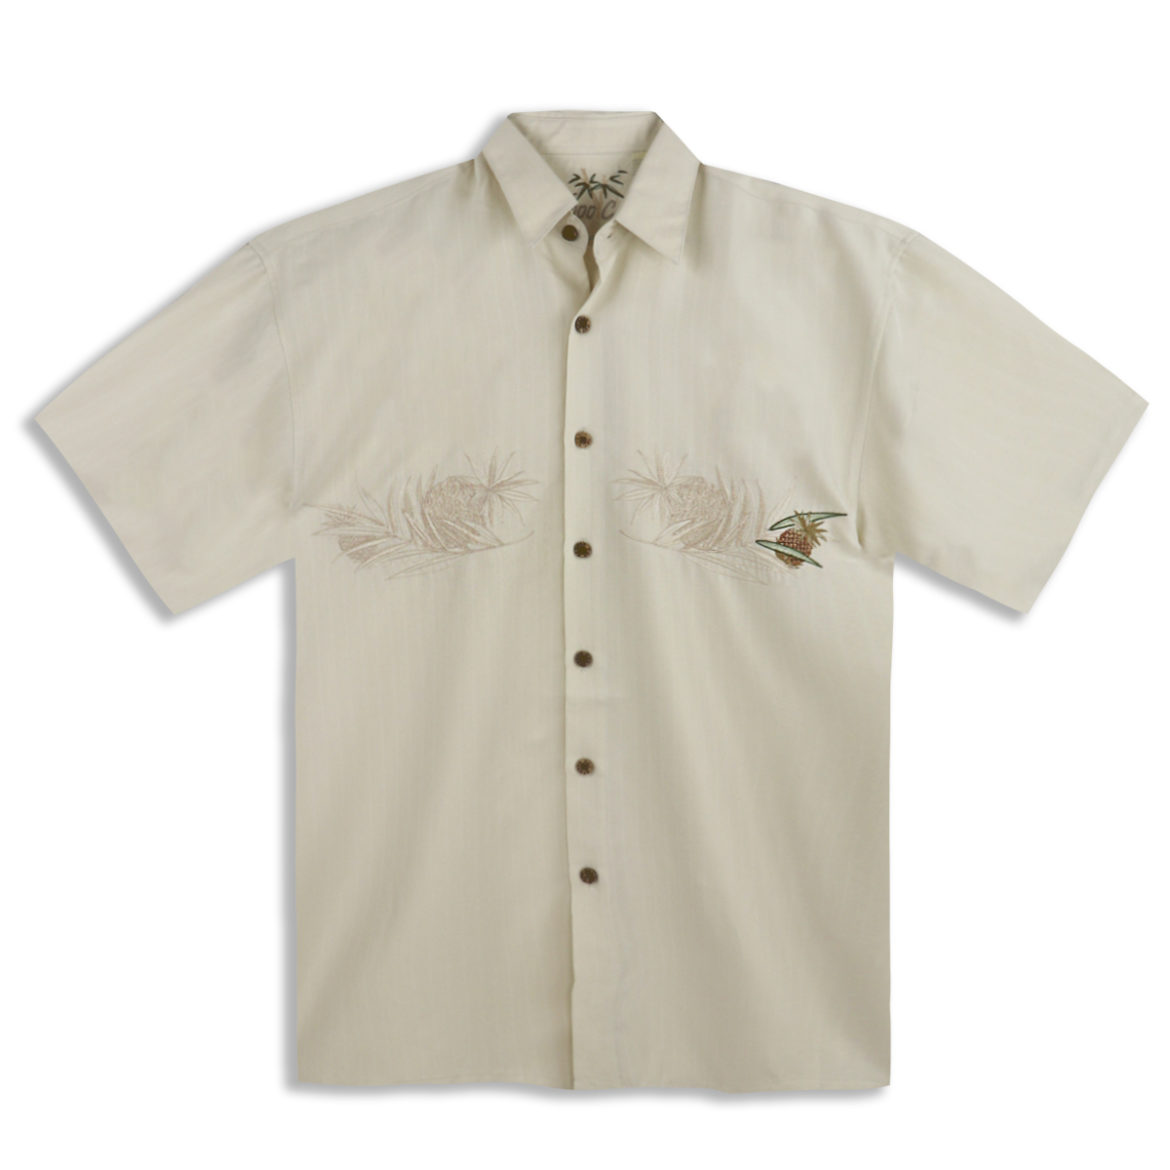 Bamboo Cay - Mens Shirt - Lovely Pineapple - Cream - Front View